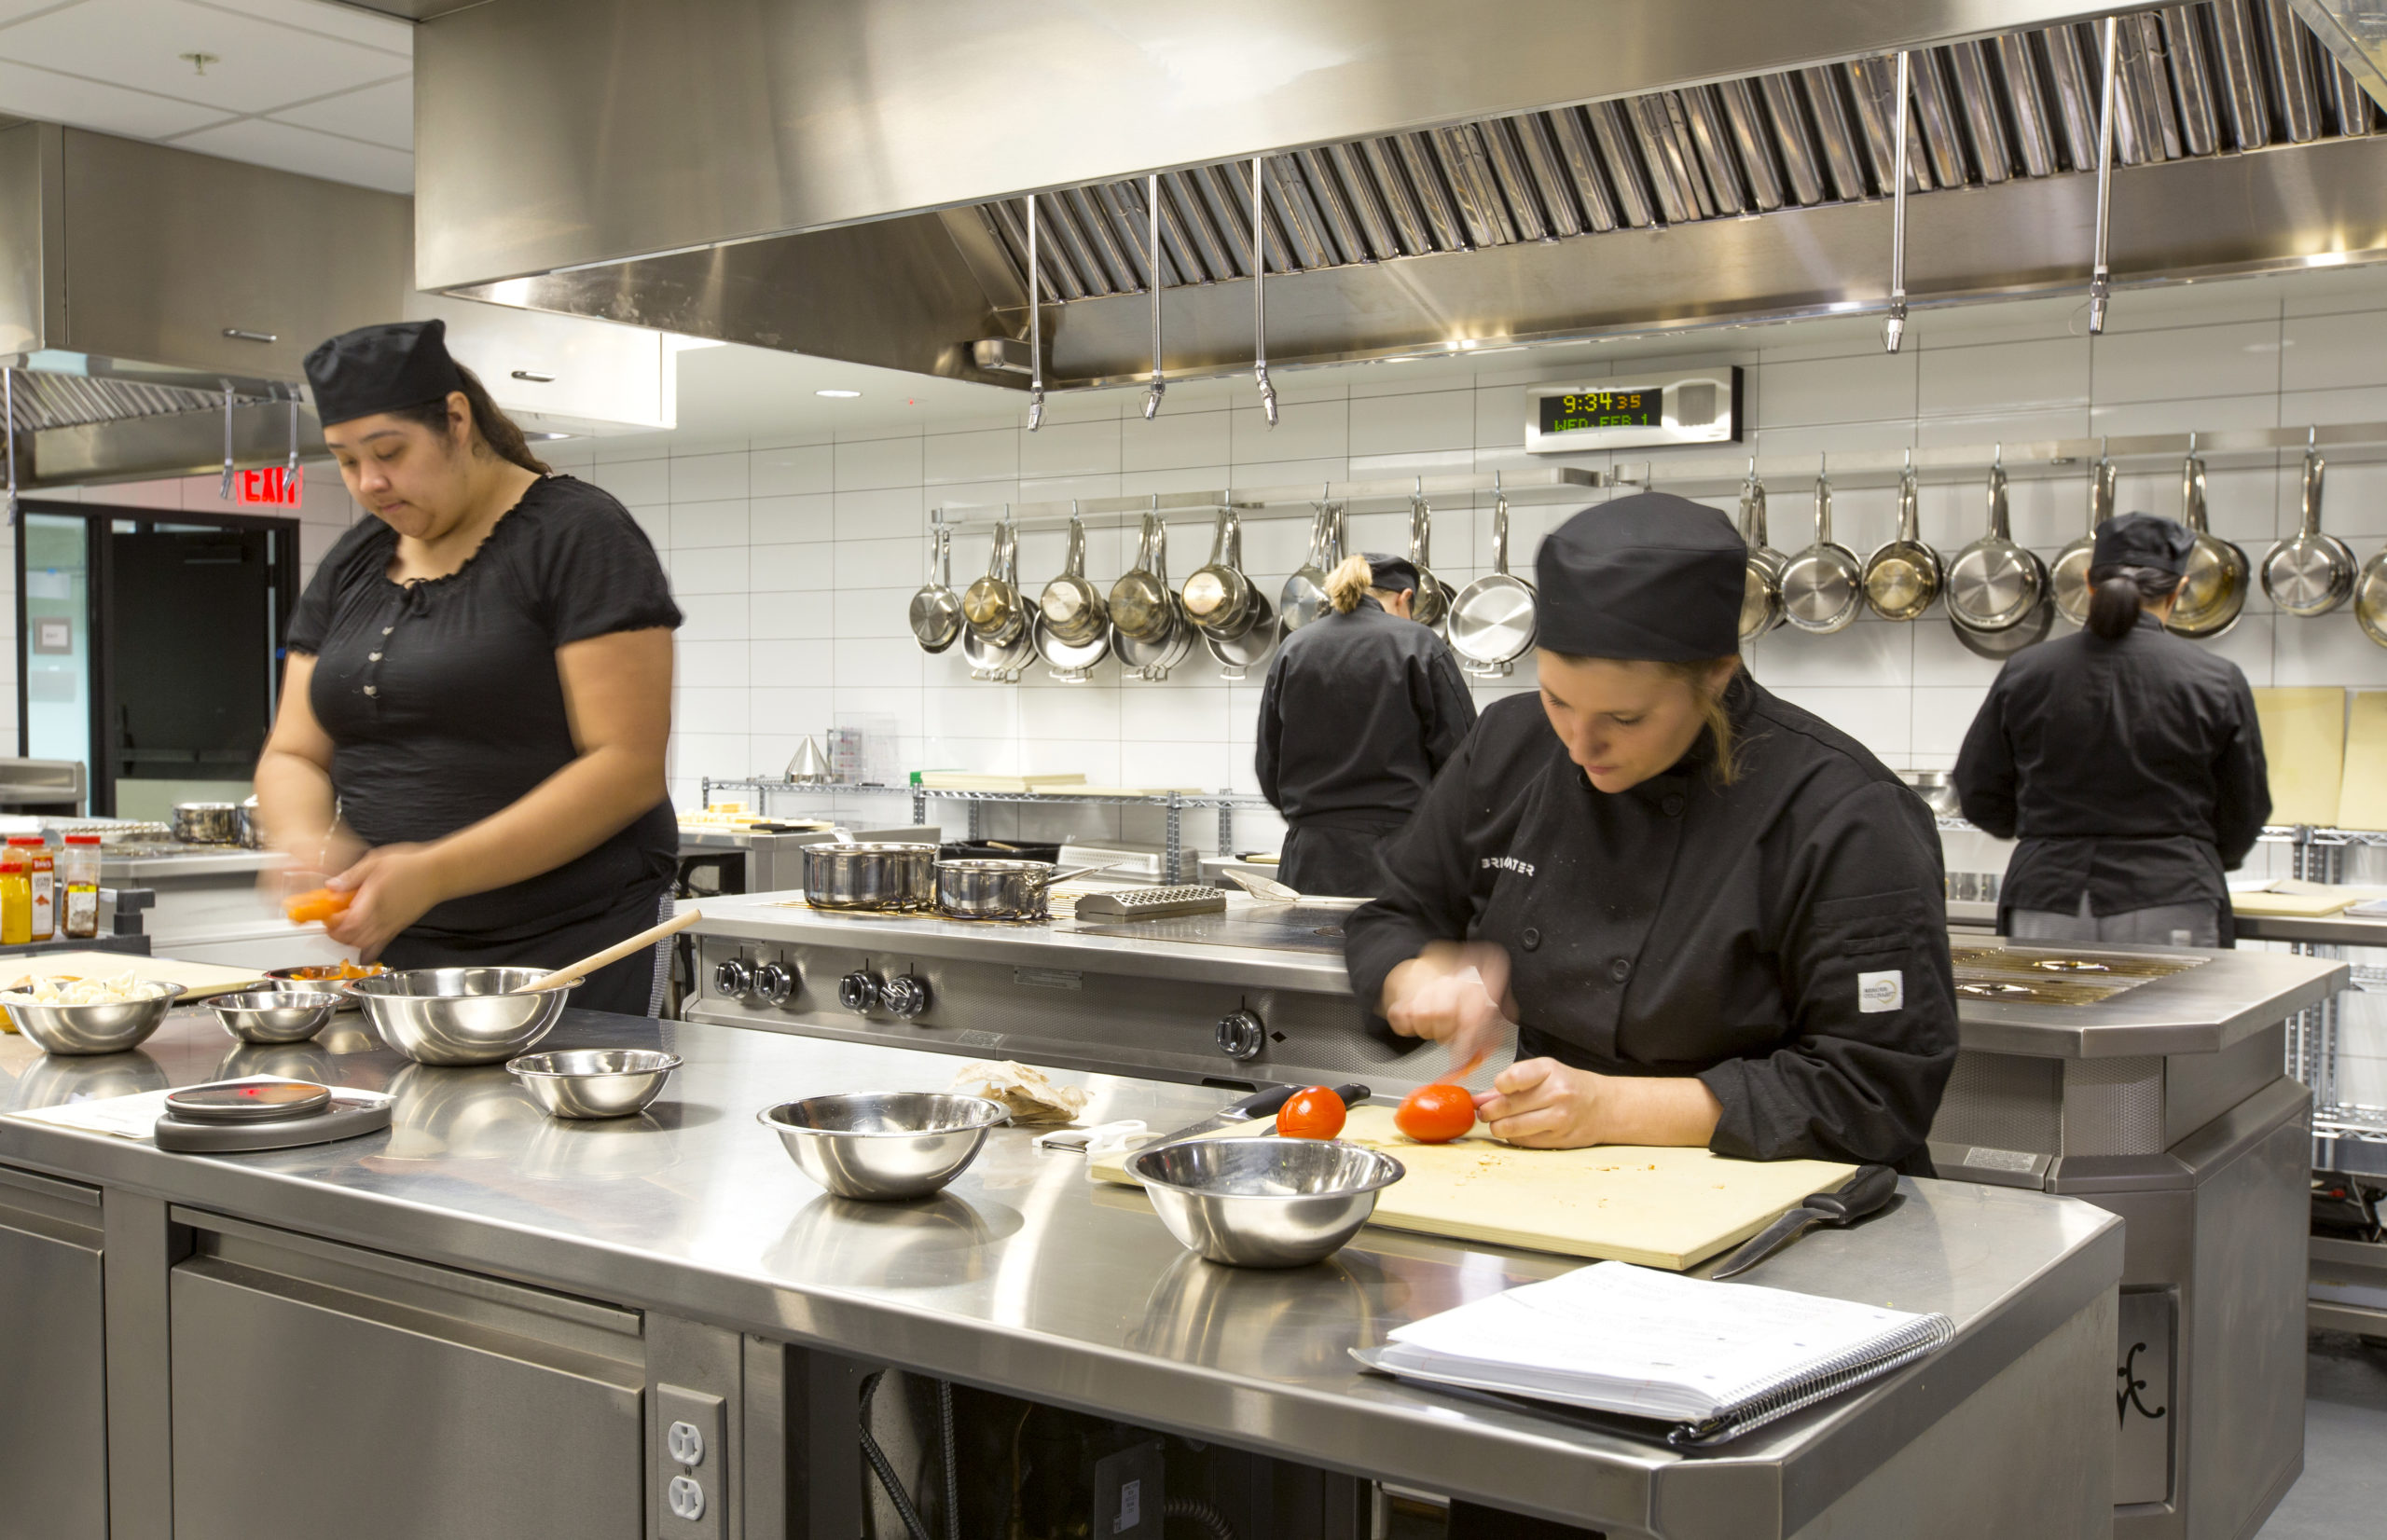 Brightwater at NWACC: Obtaining Skills for the Growing Sector of Food Service